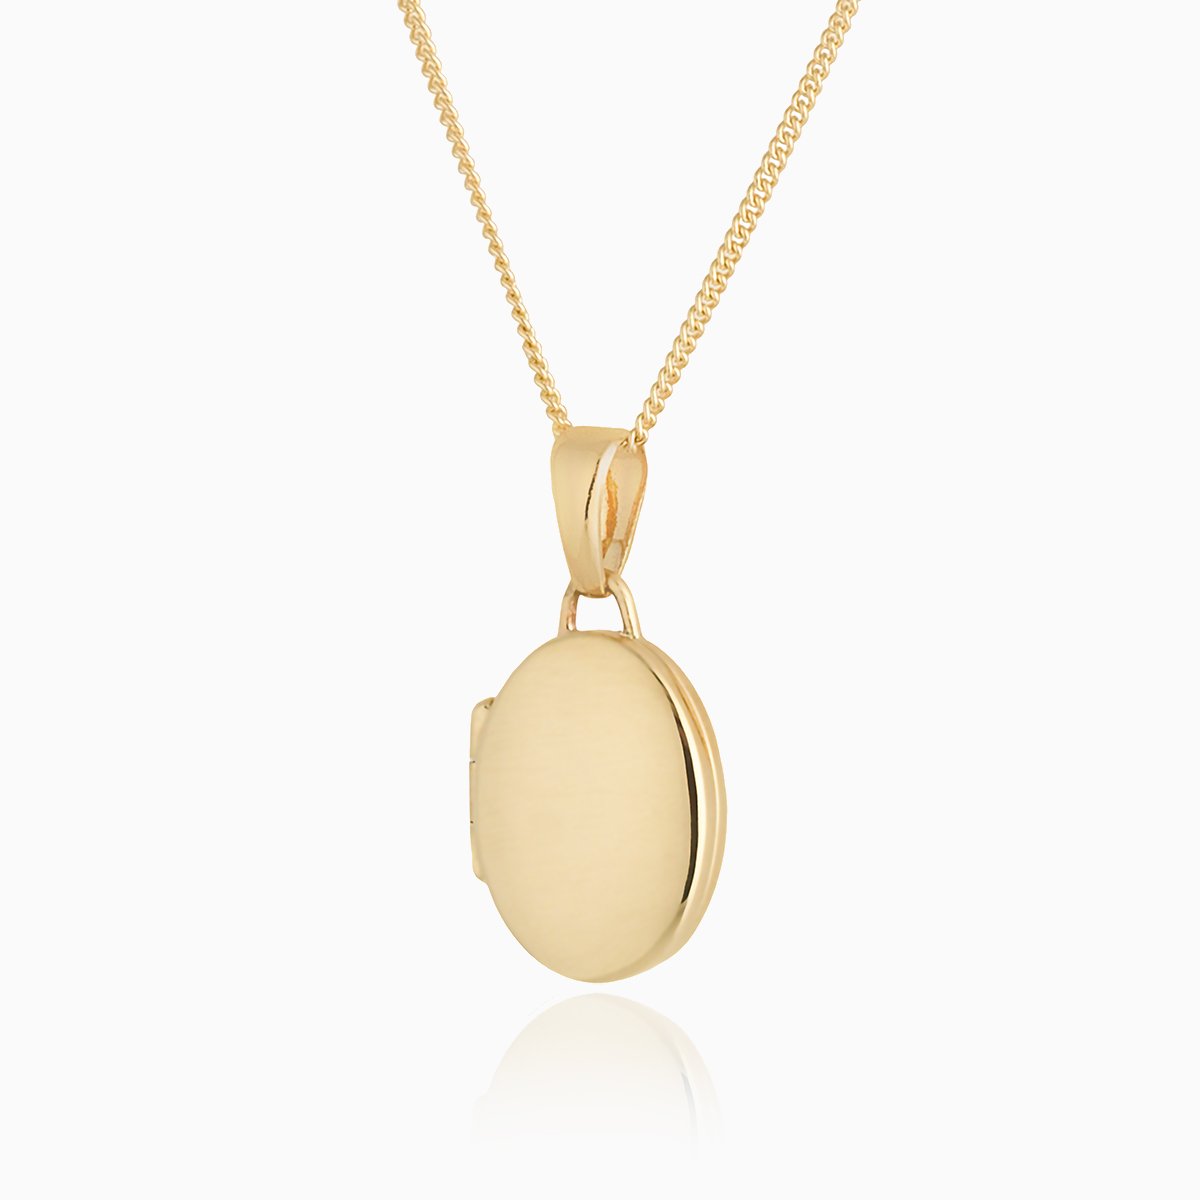 Product title: Petite Gold Oval Locket, product type: Locket